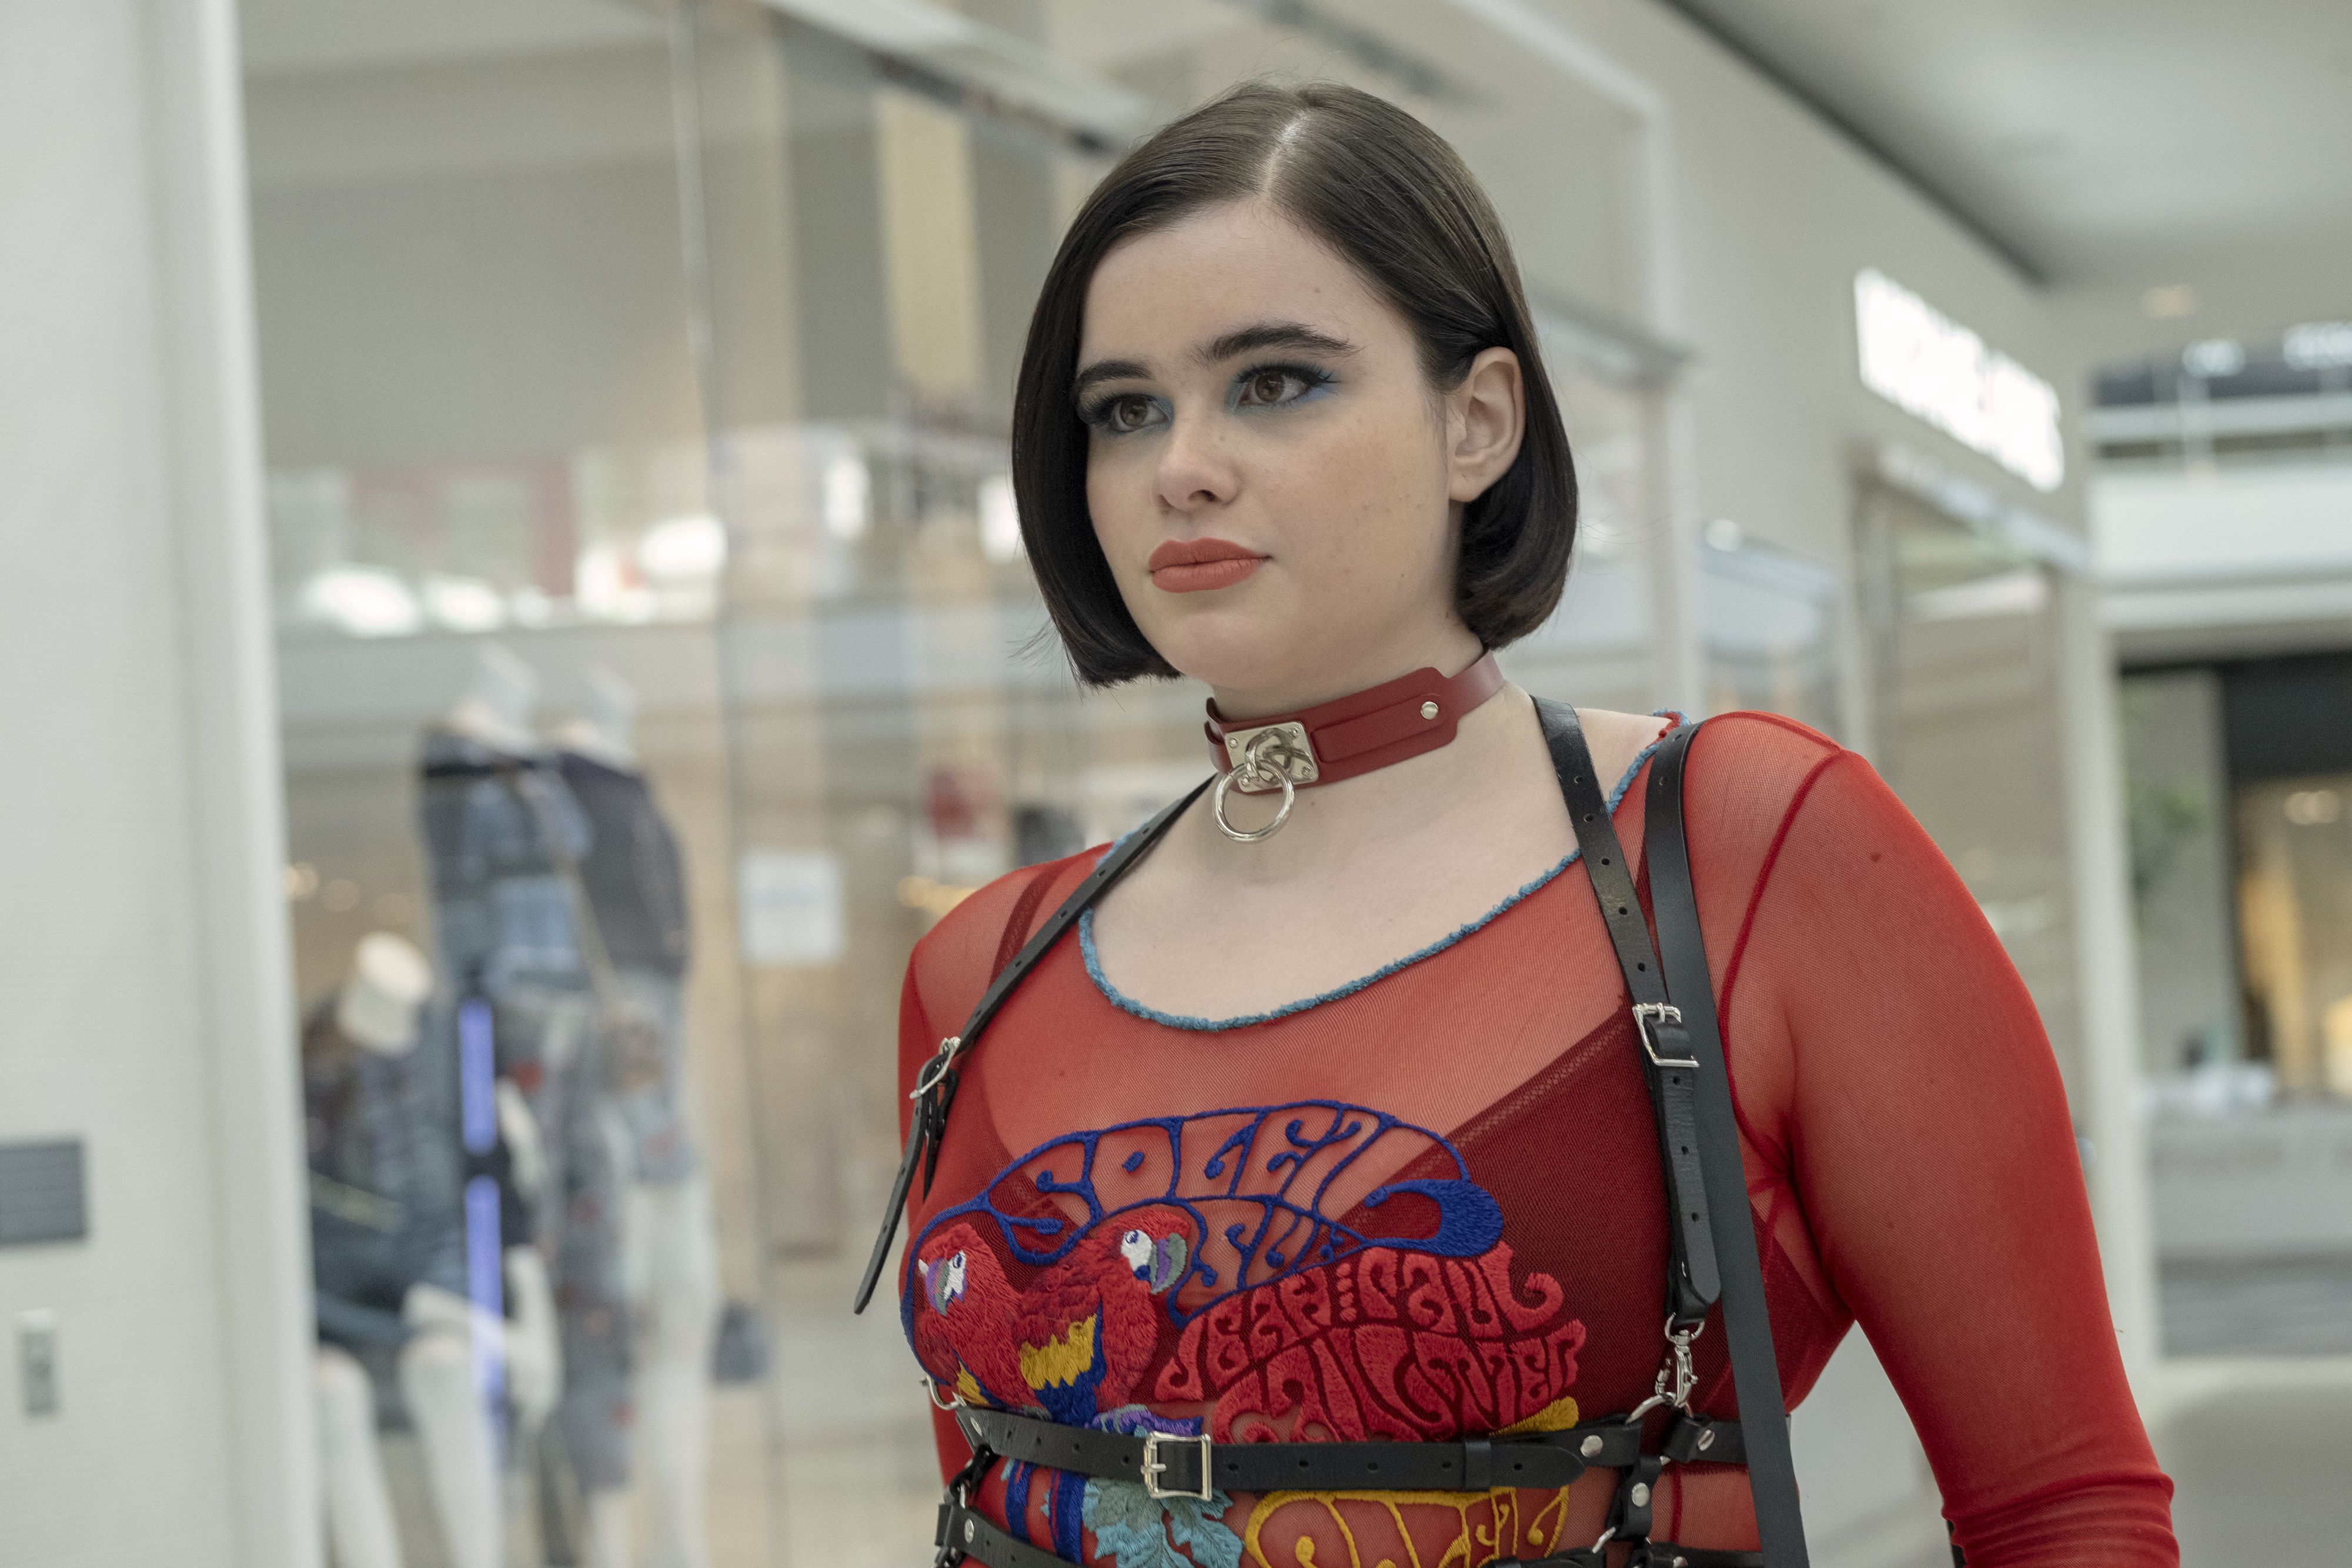 Barbie Ferreira became a household name after starring in Euphoria, but the star has had a large online fanbase since she first appeared on Tumblr as @barbienox